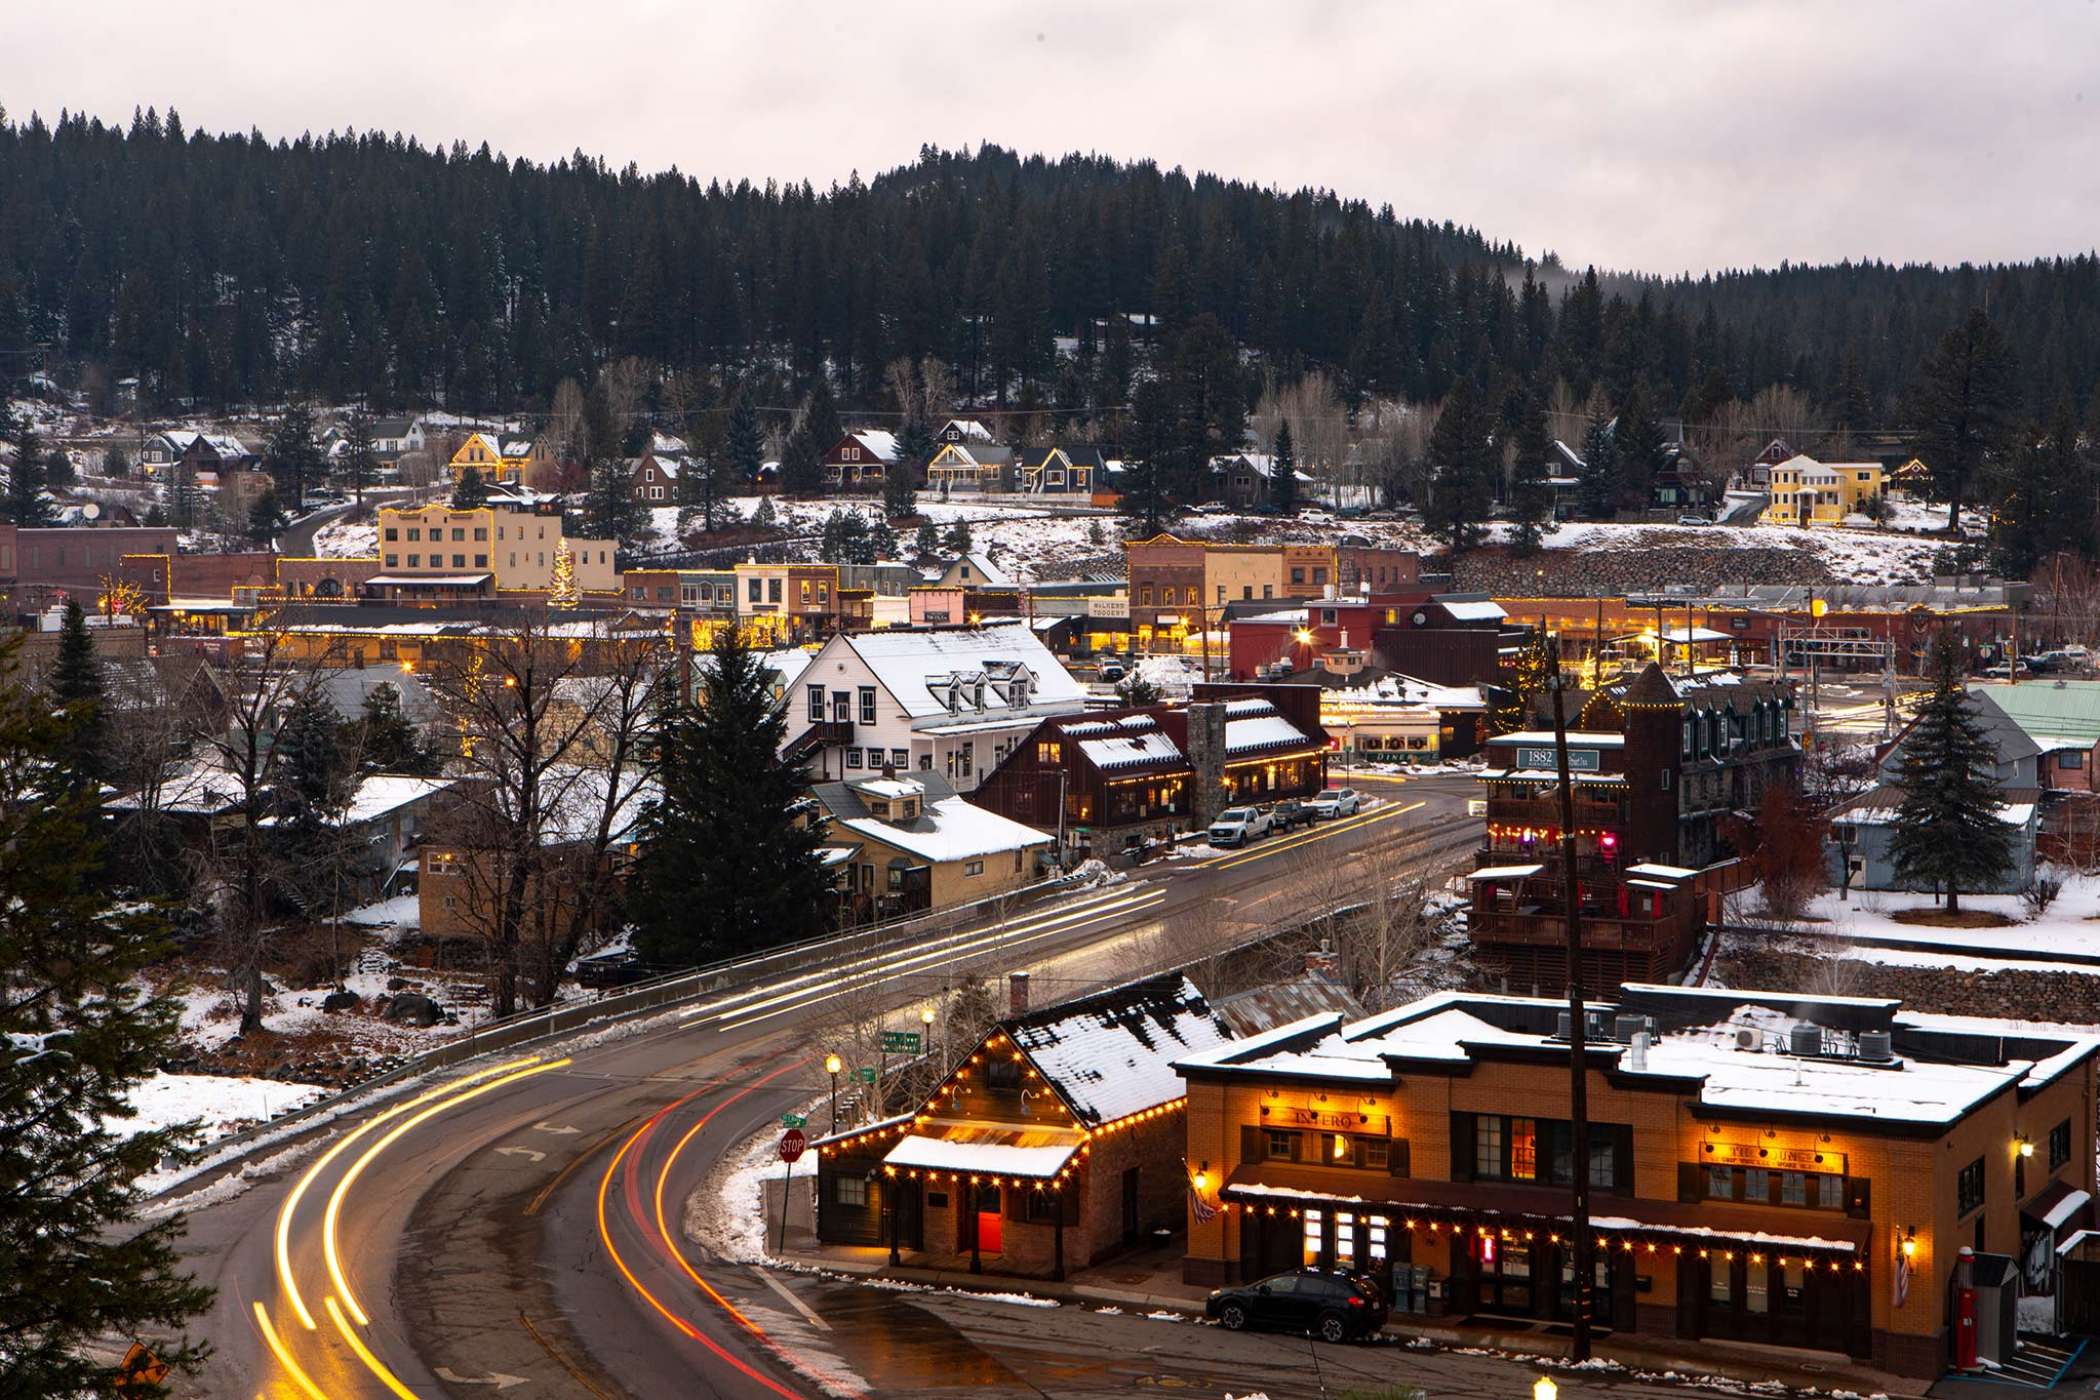 Truckee’s restaurants are going into survival mode during the busiest week of the year